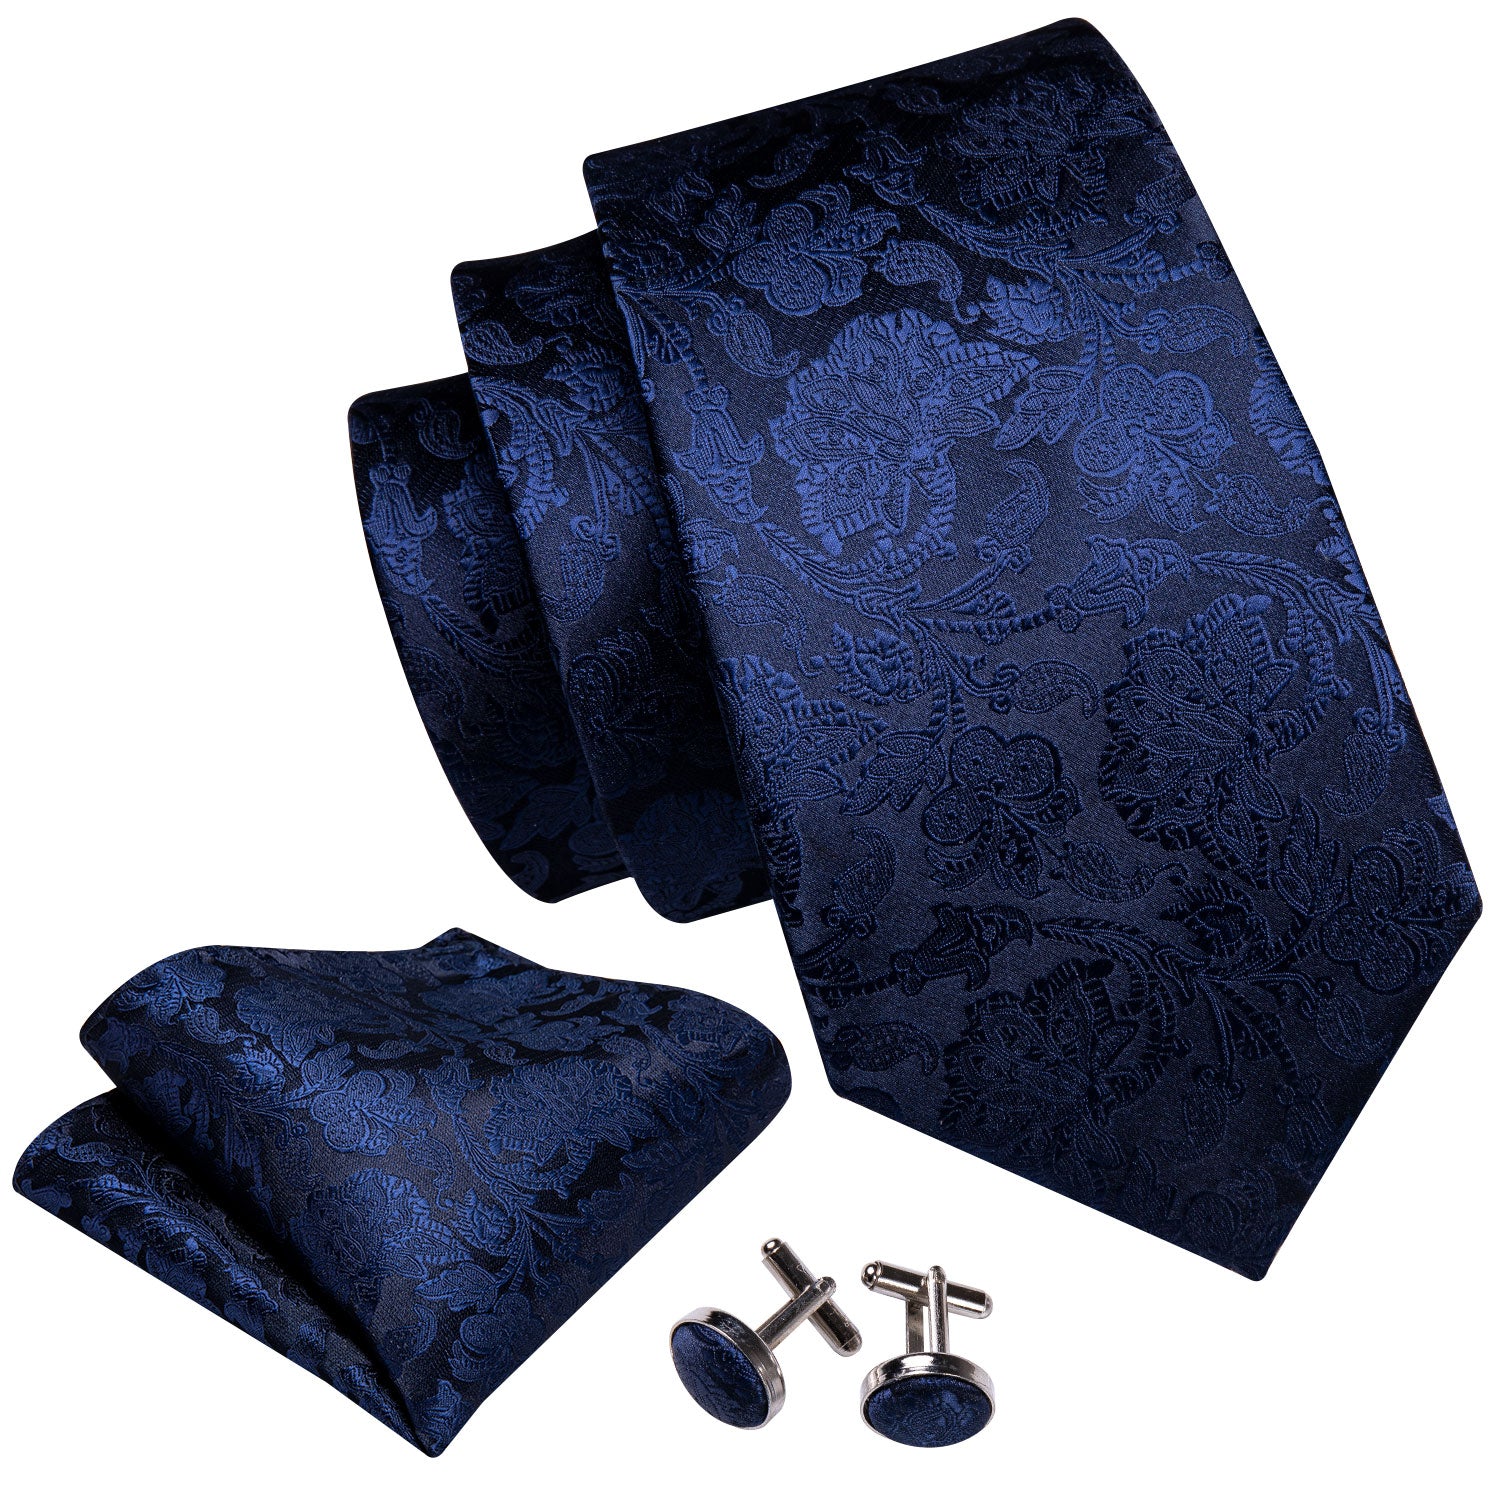 Barry.Wang Extra Long Tie Royal Blue Floral Silk 63 Inches Tie Hanky Cufflinks Set for Men